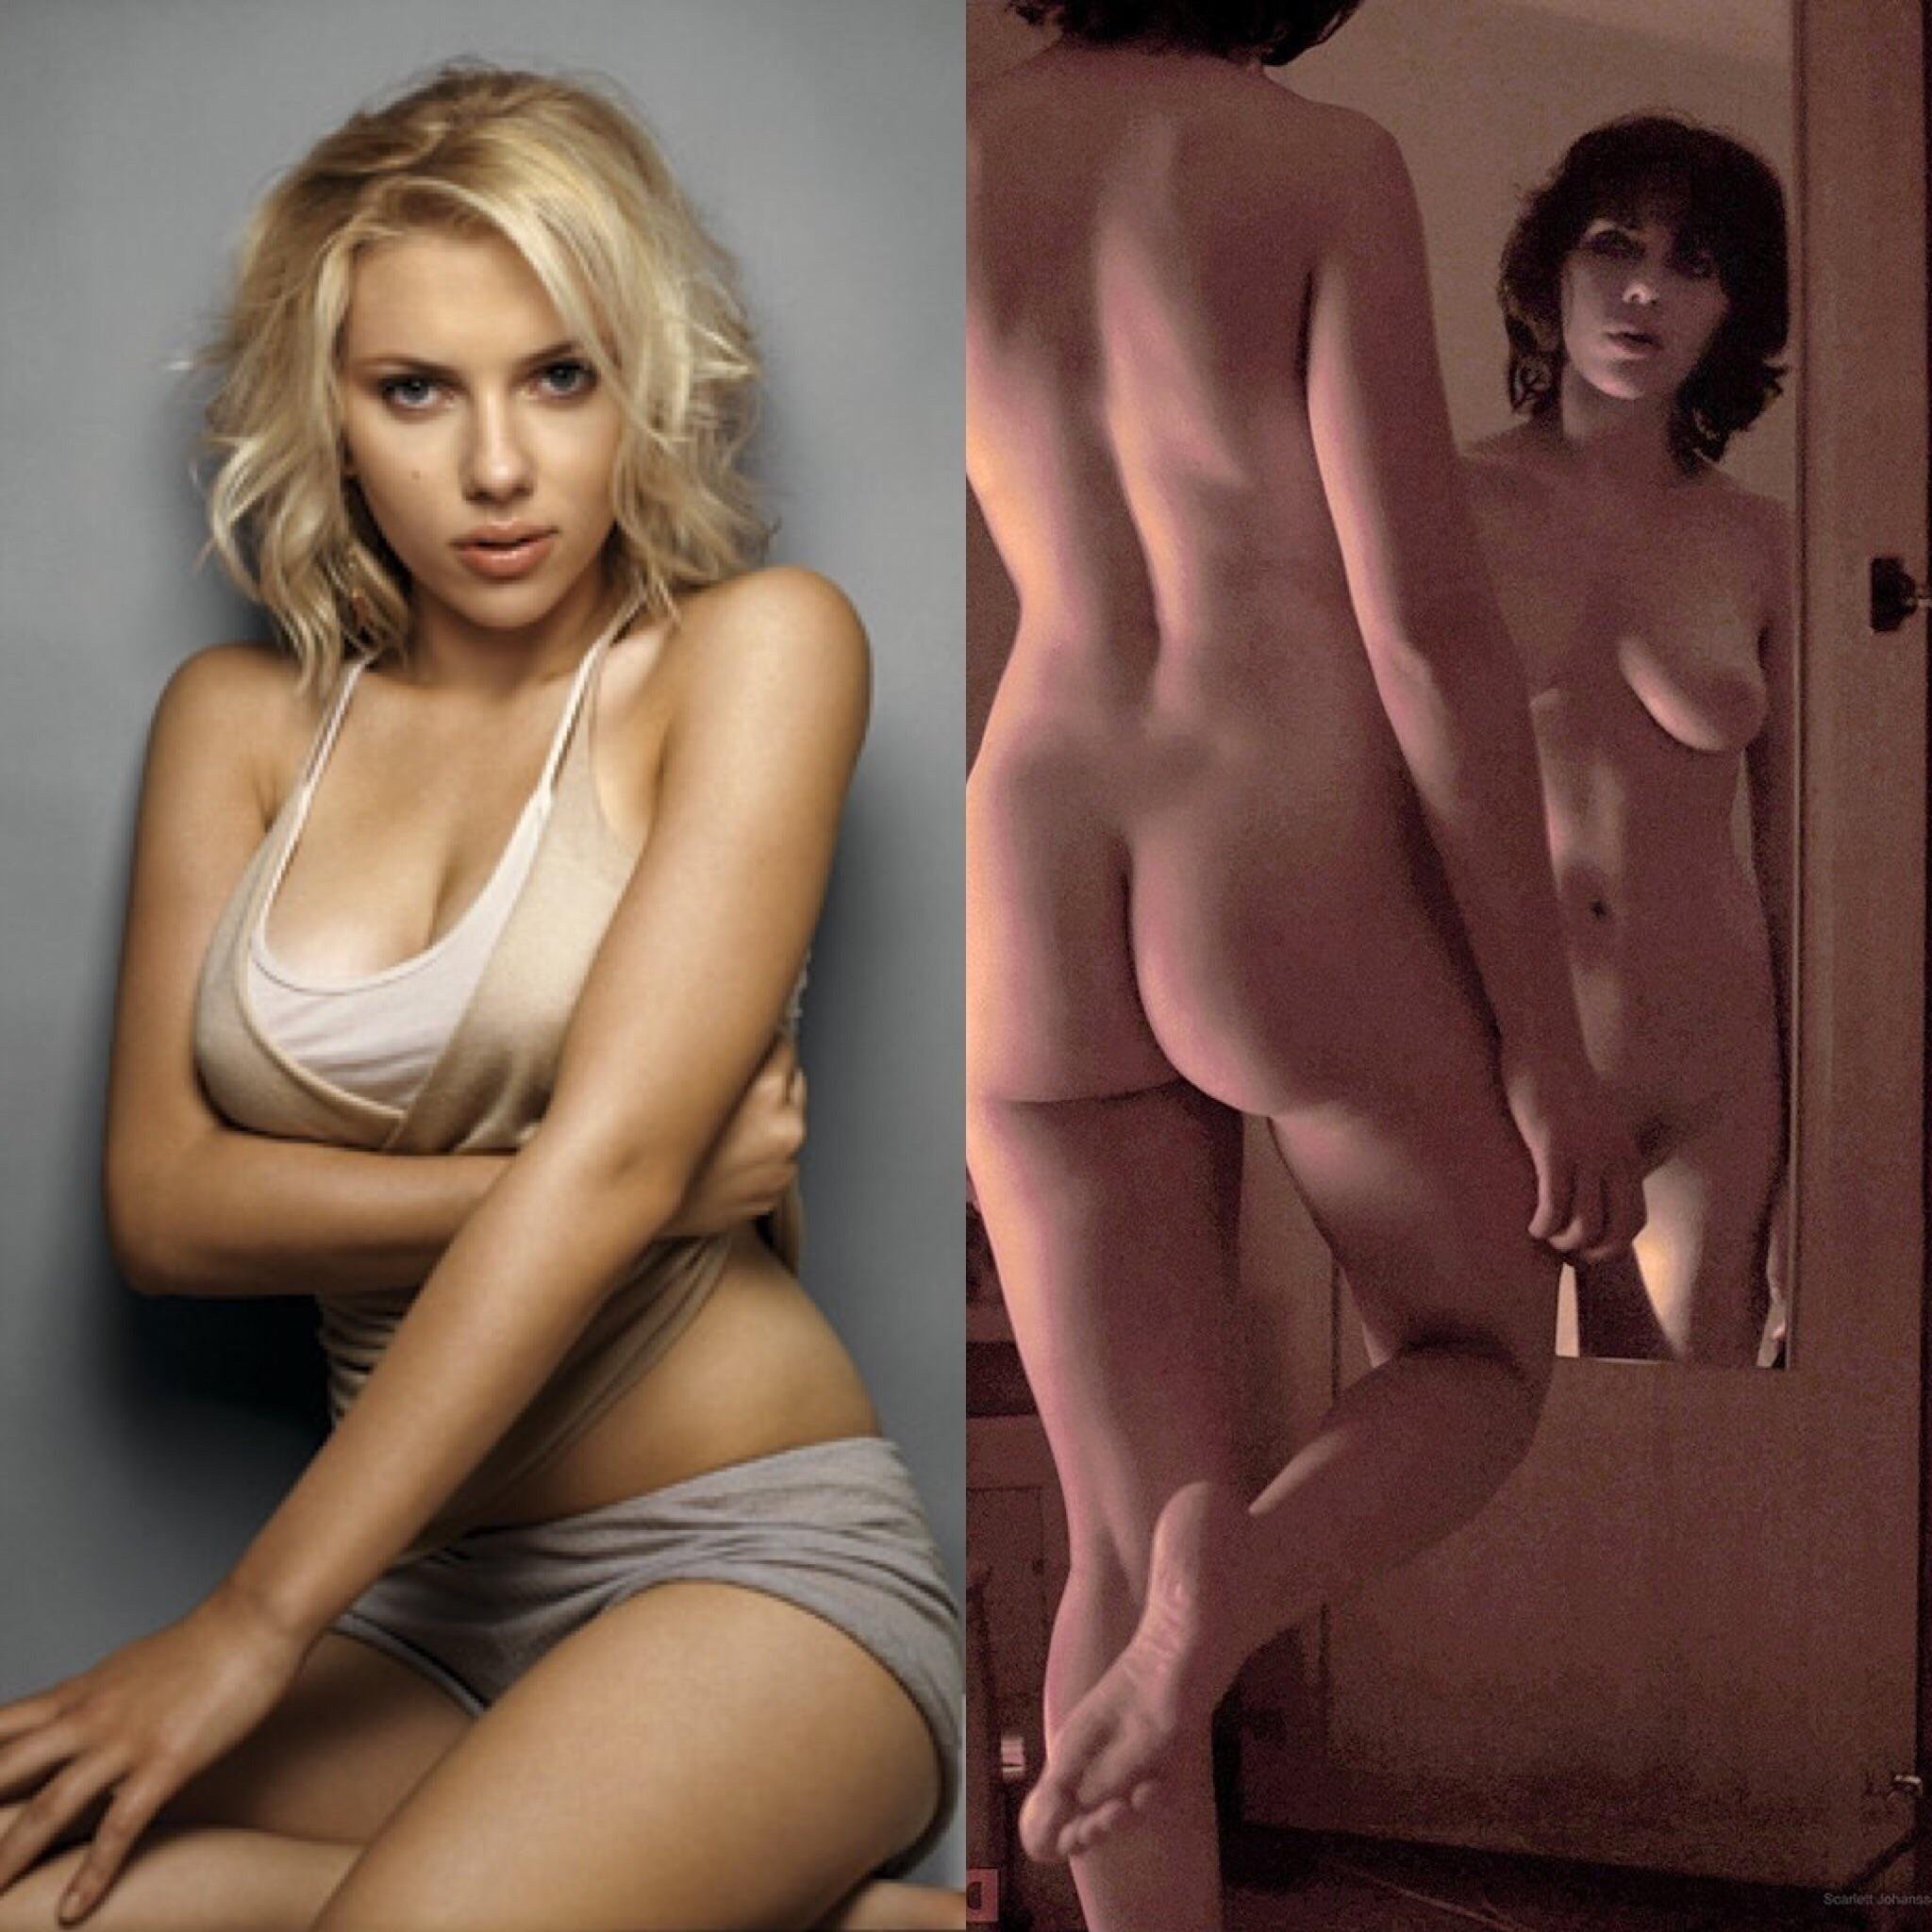 cindy vian recommends scarlet johanson naked pic pic